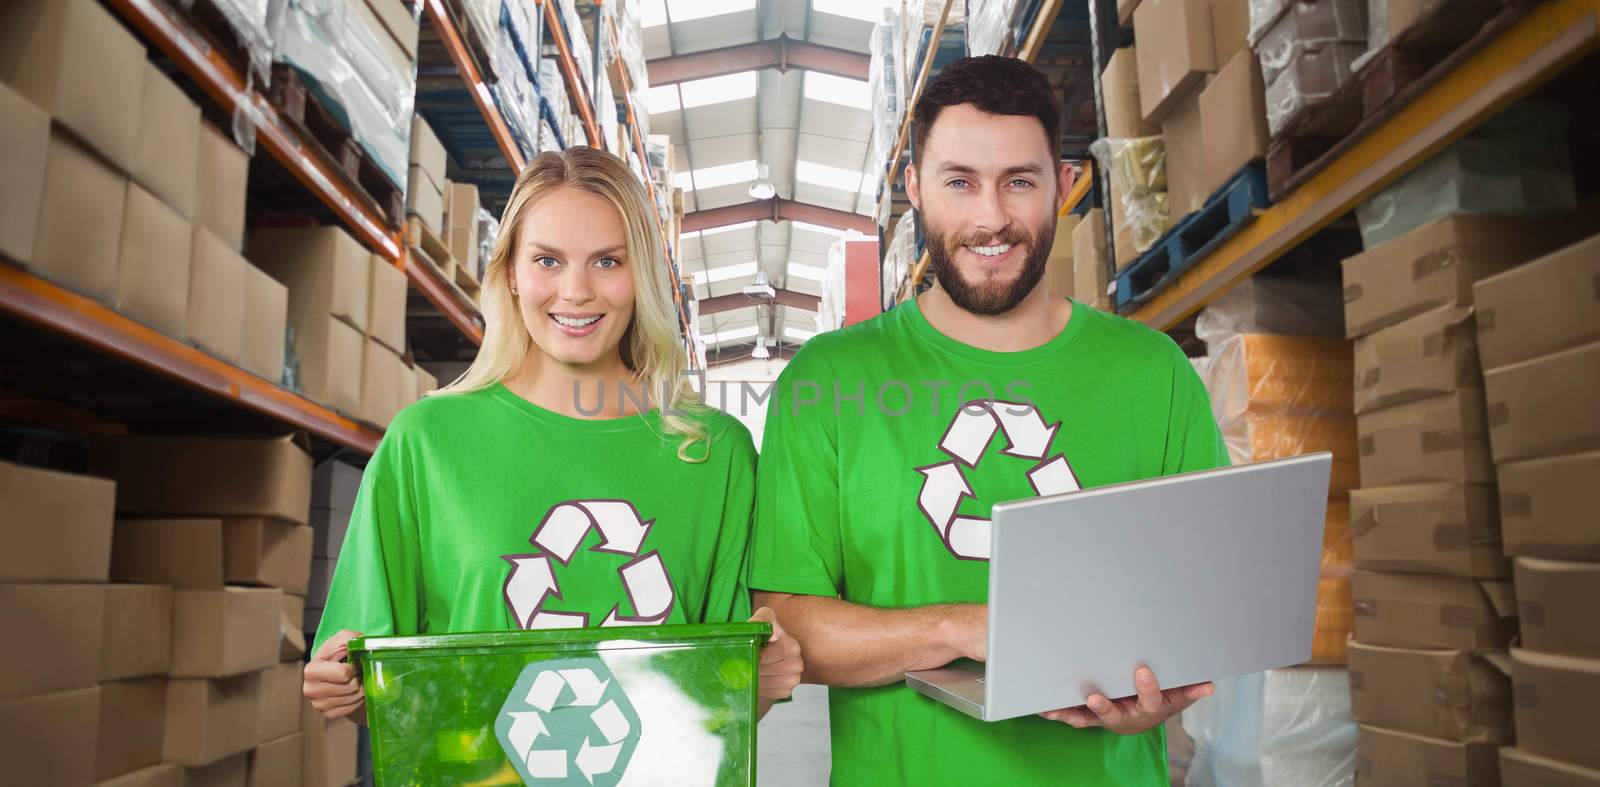 Portrait of smiling volunteers in recycling symbol tshirts  against shelves with boxes in warehouse